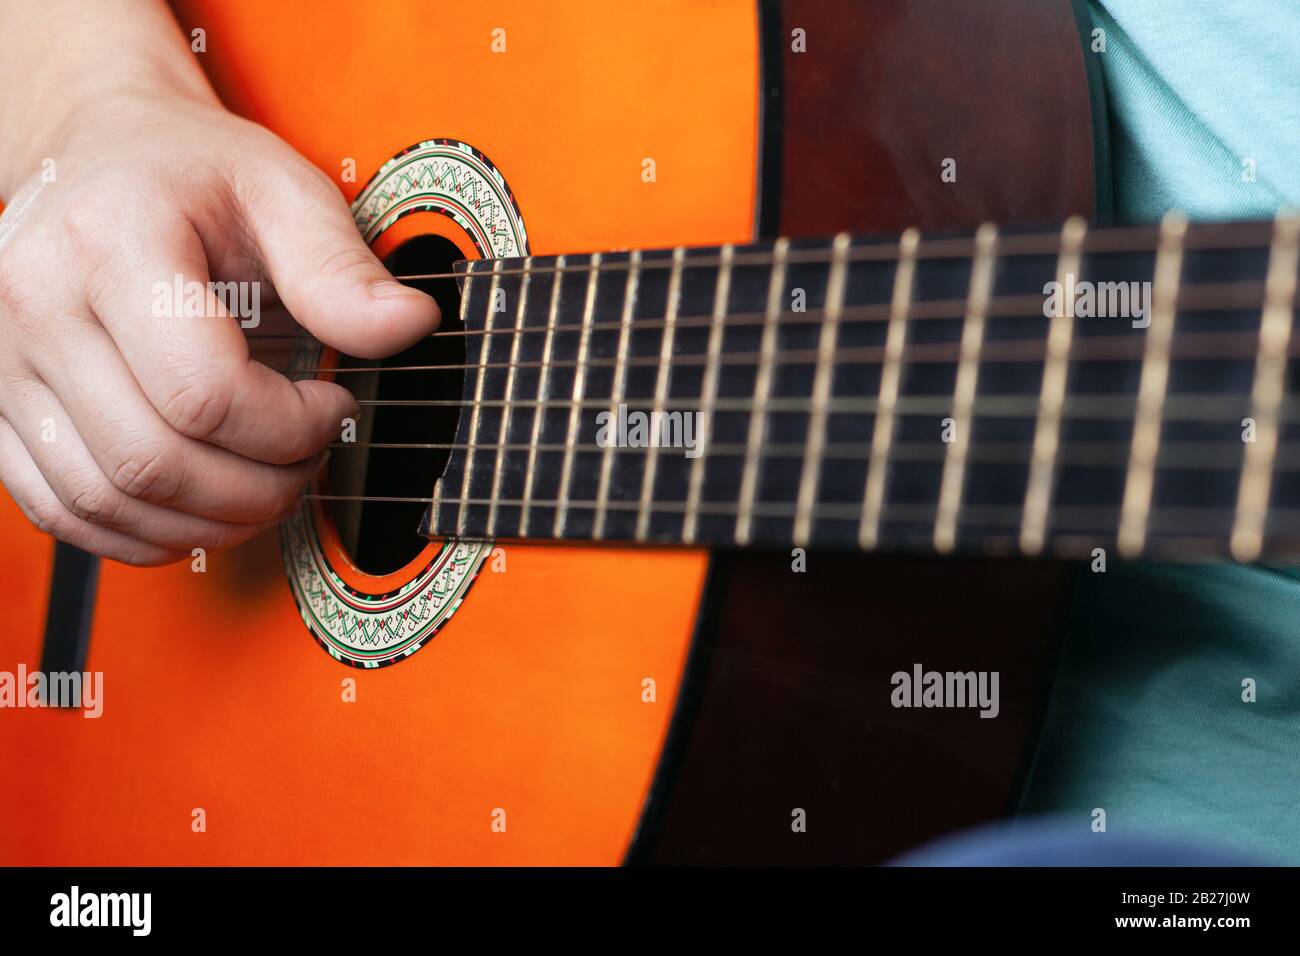 male hand plays acoustic guitar strings. learning to play a musical instrument orange color close-up. Stock Photo